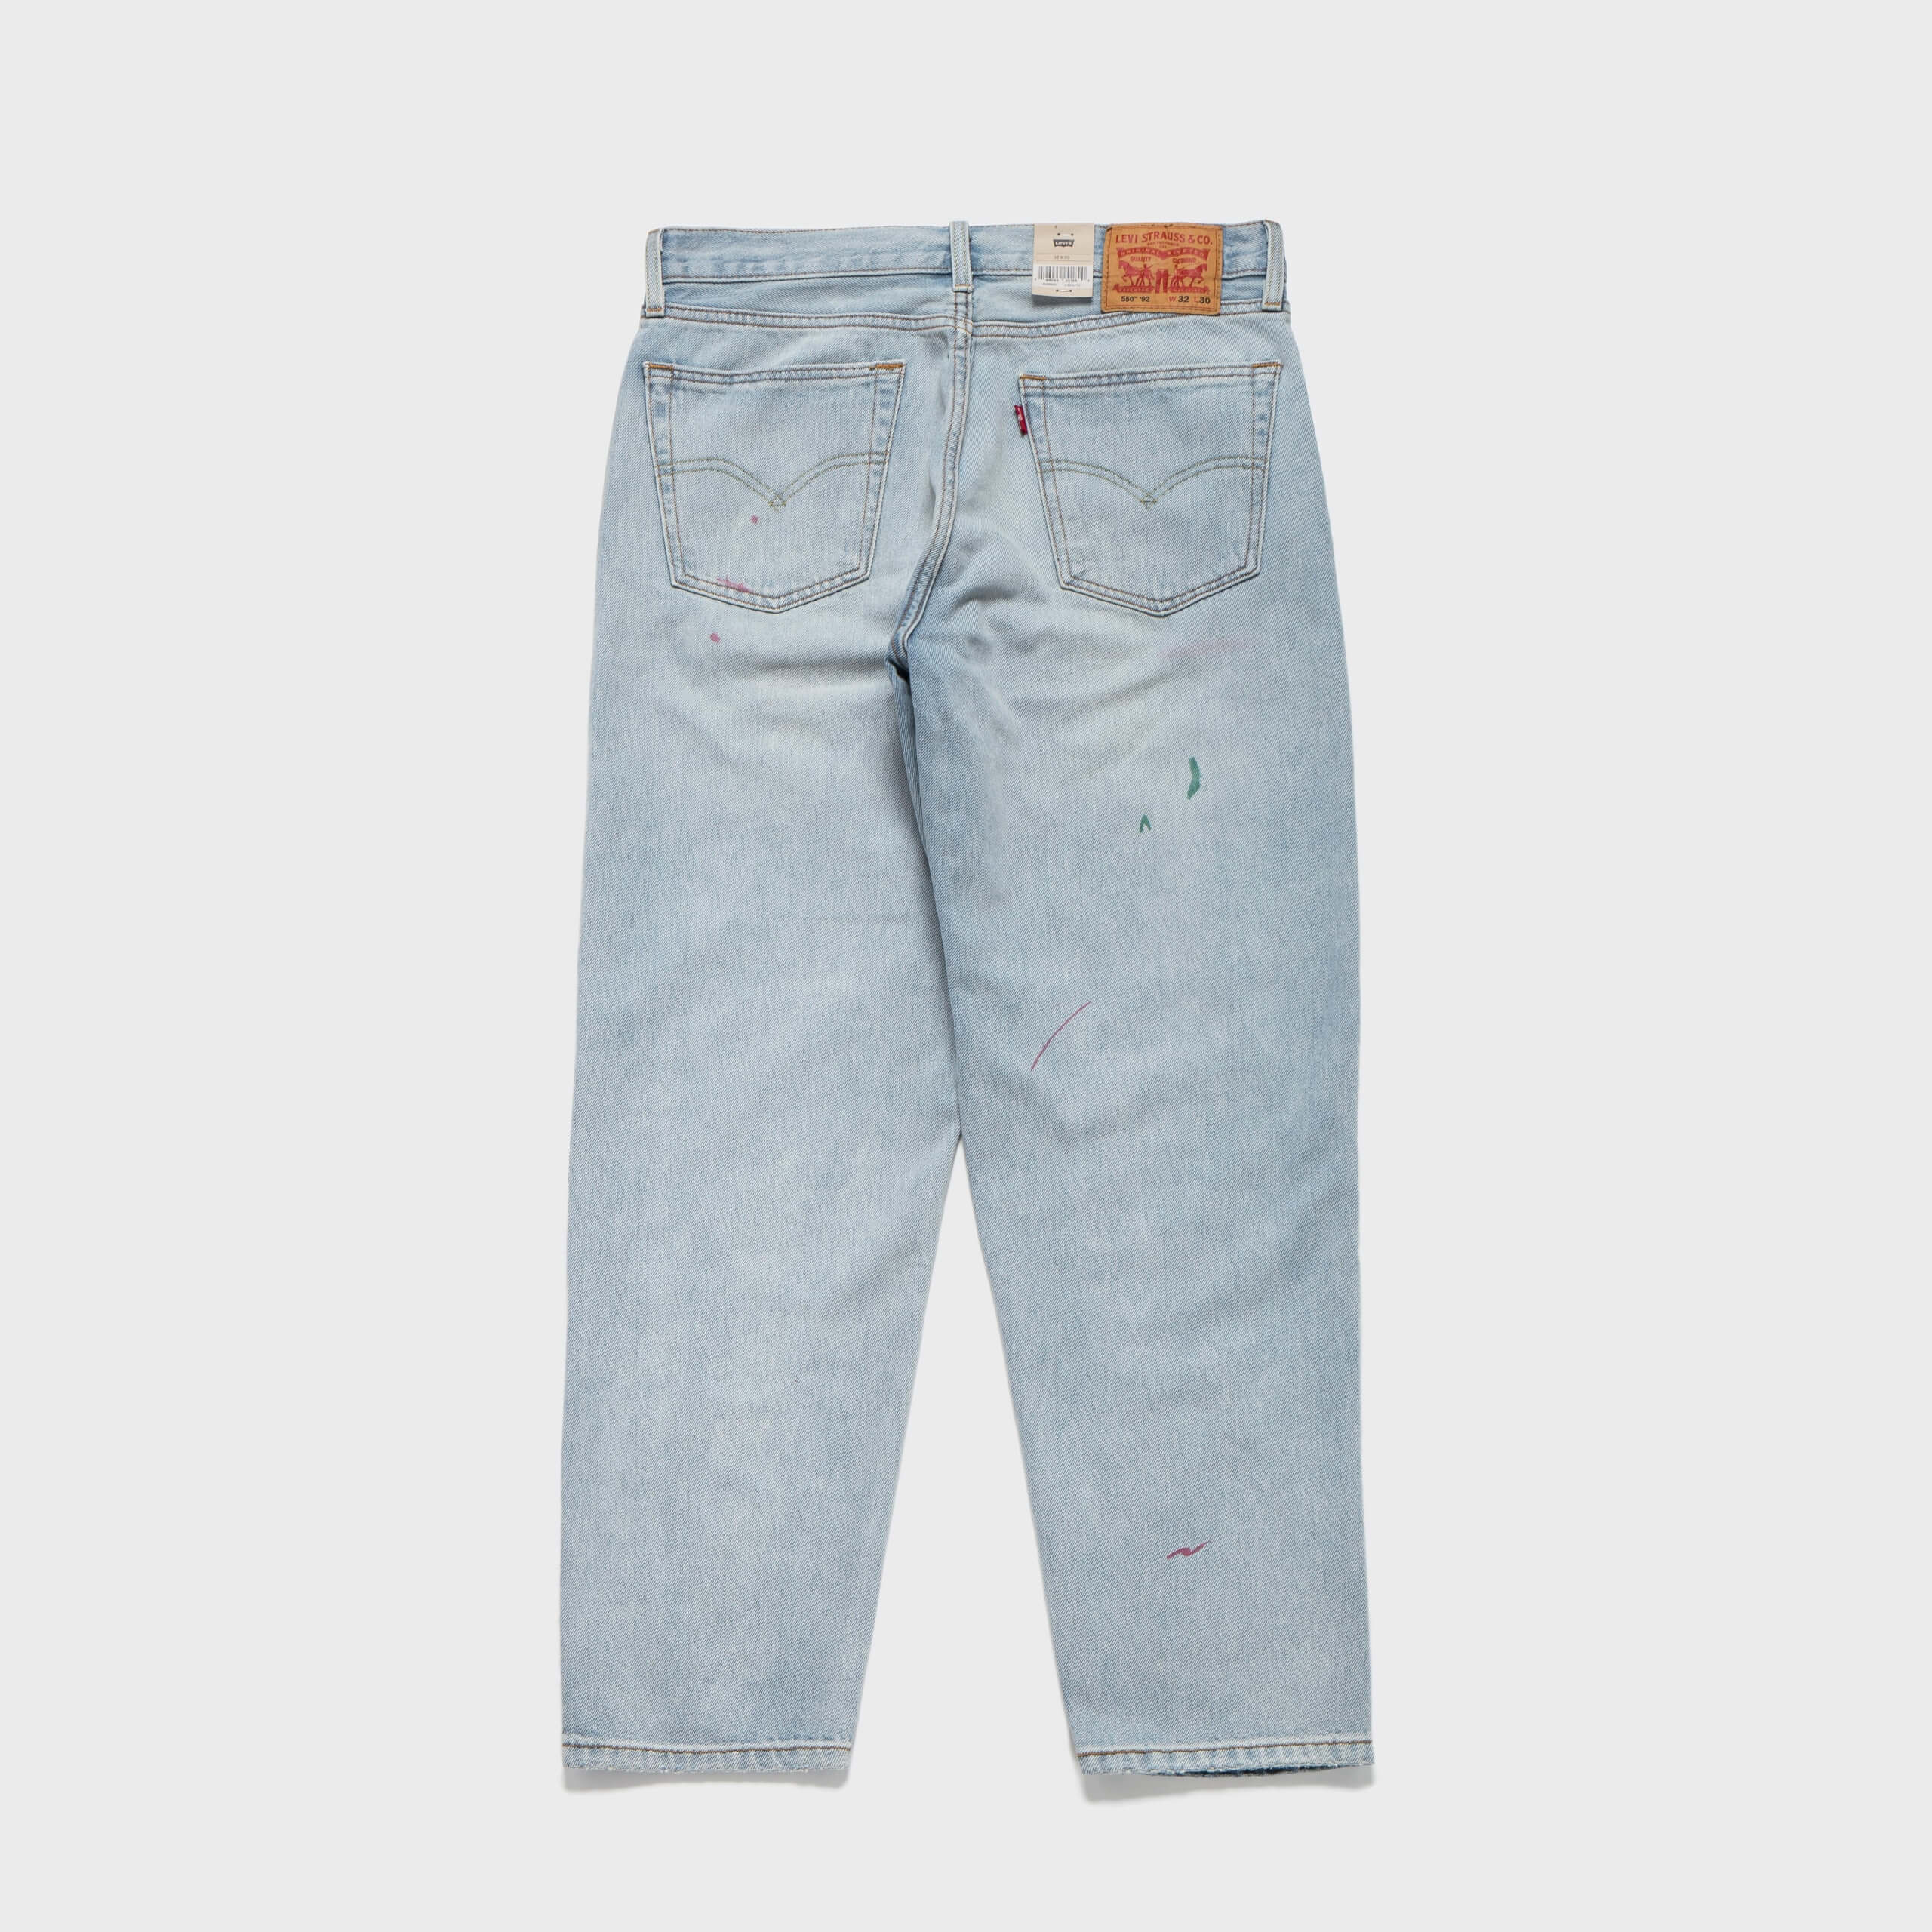 550-92-relaxed-tapered-jeans-light-denim_p1